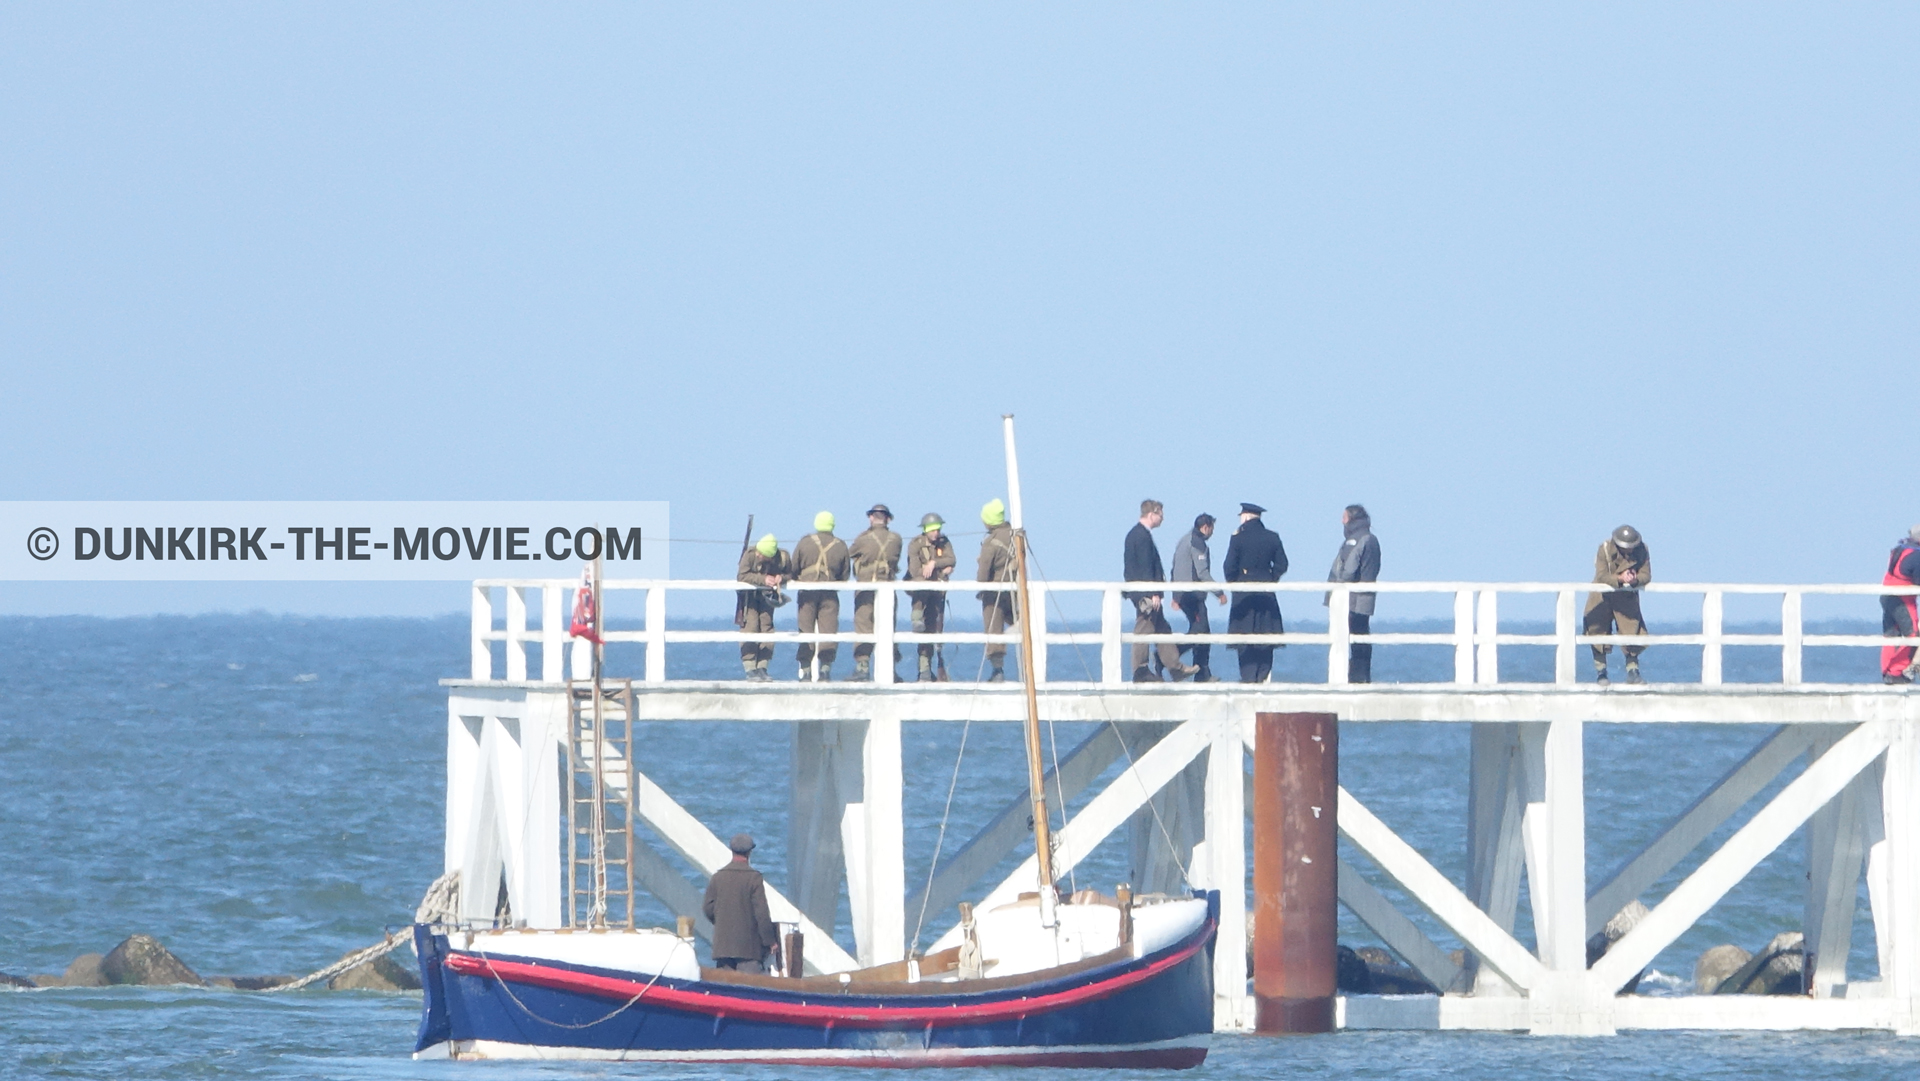 Picture with boat, blue sky, supernumeraries, Hoyte van Hoytema, EST pier, Kenneth Branagh, Christopher Nolan, Henry Finlay lifeboat,  from behind the scene of the Dunkirk movie by Nolan